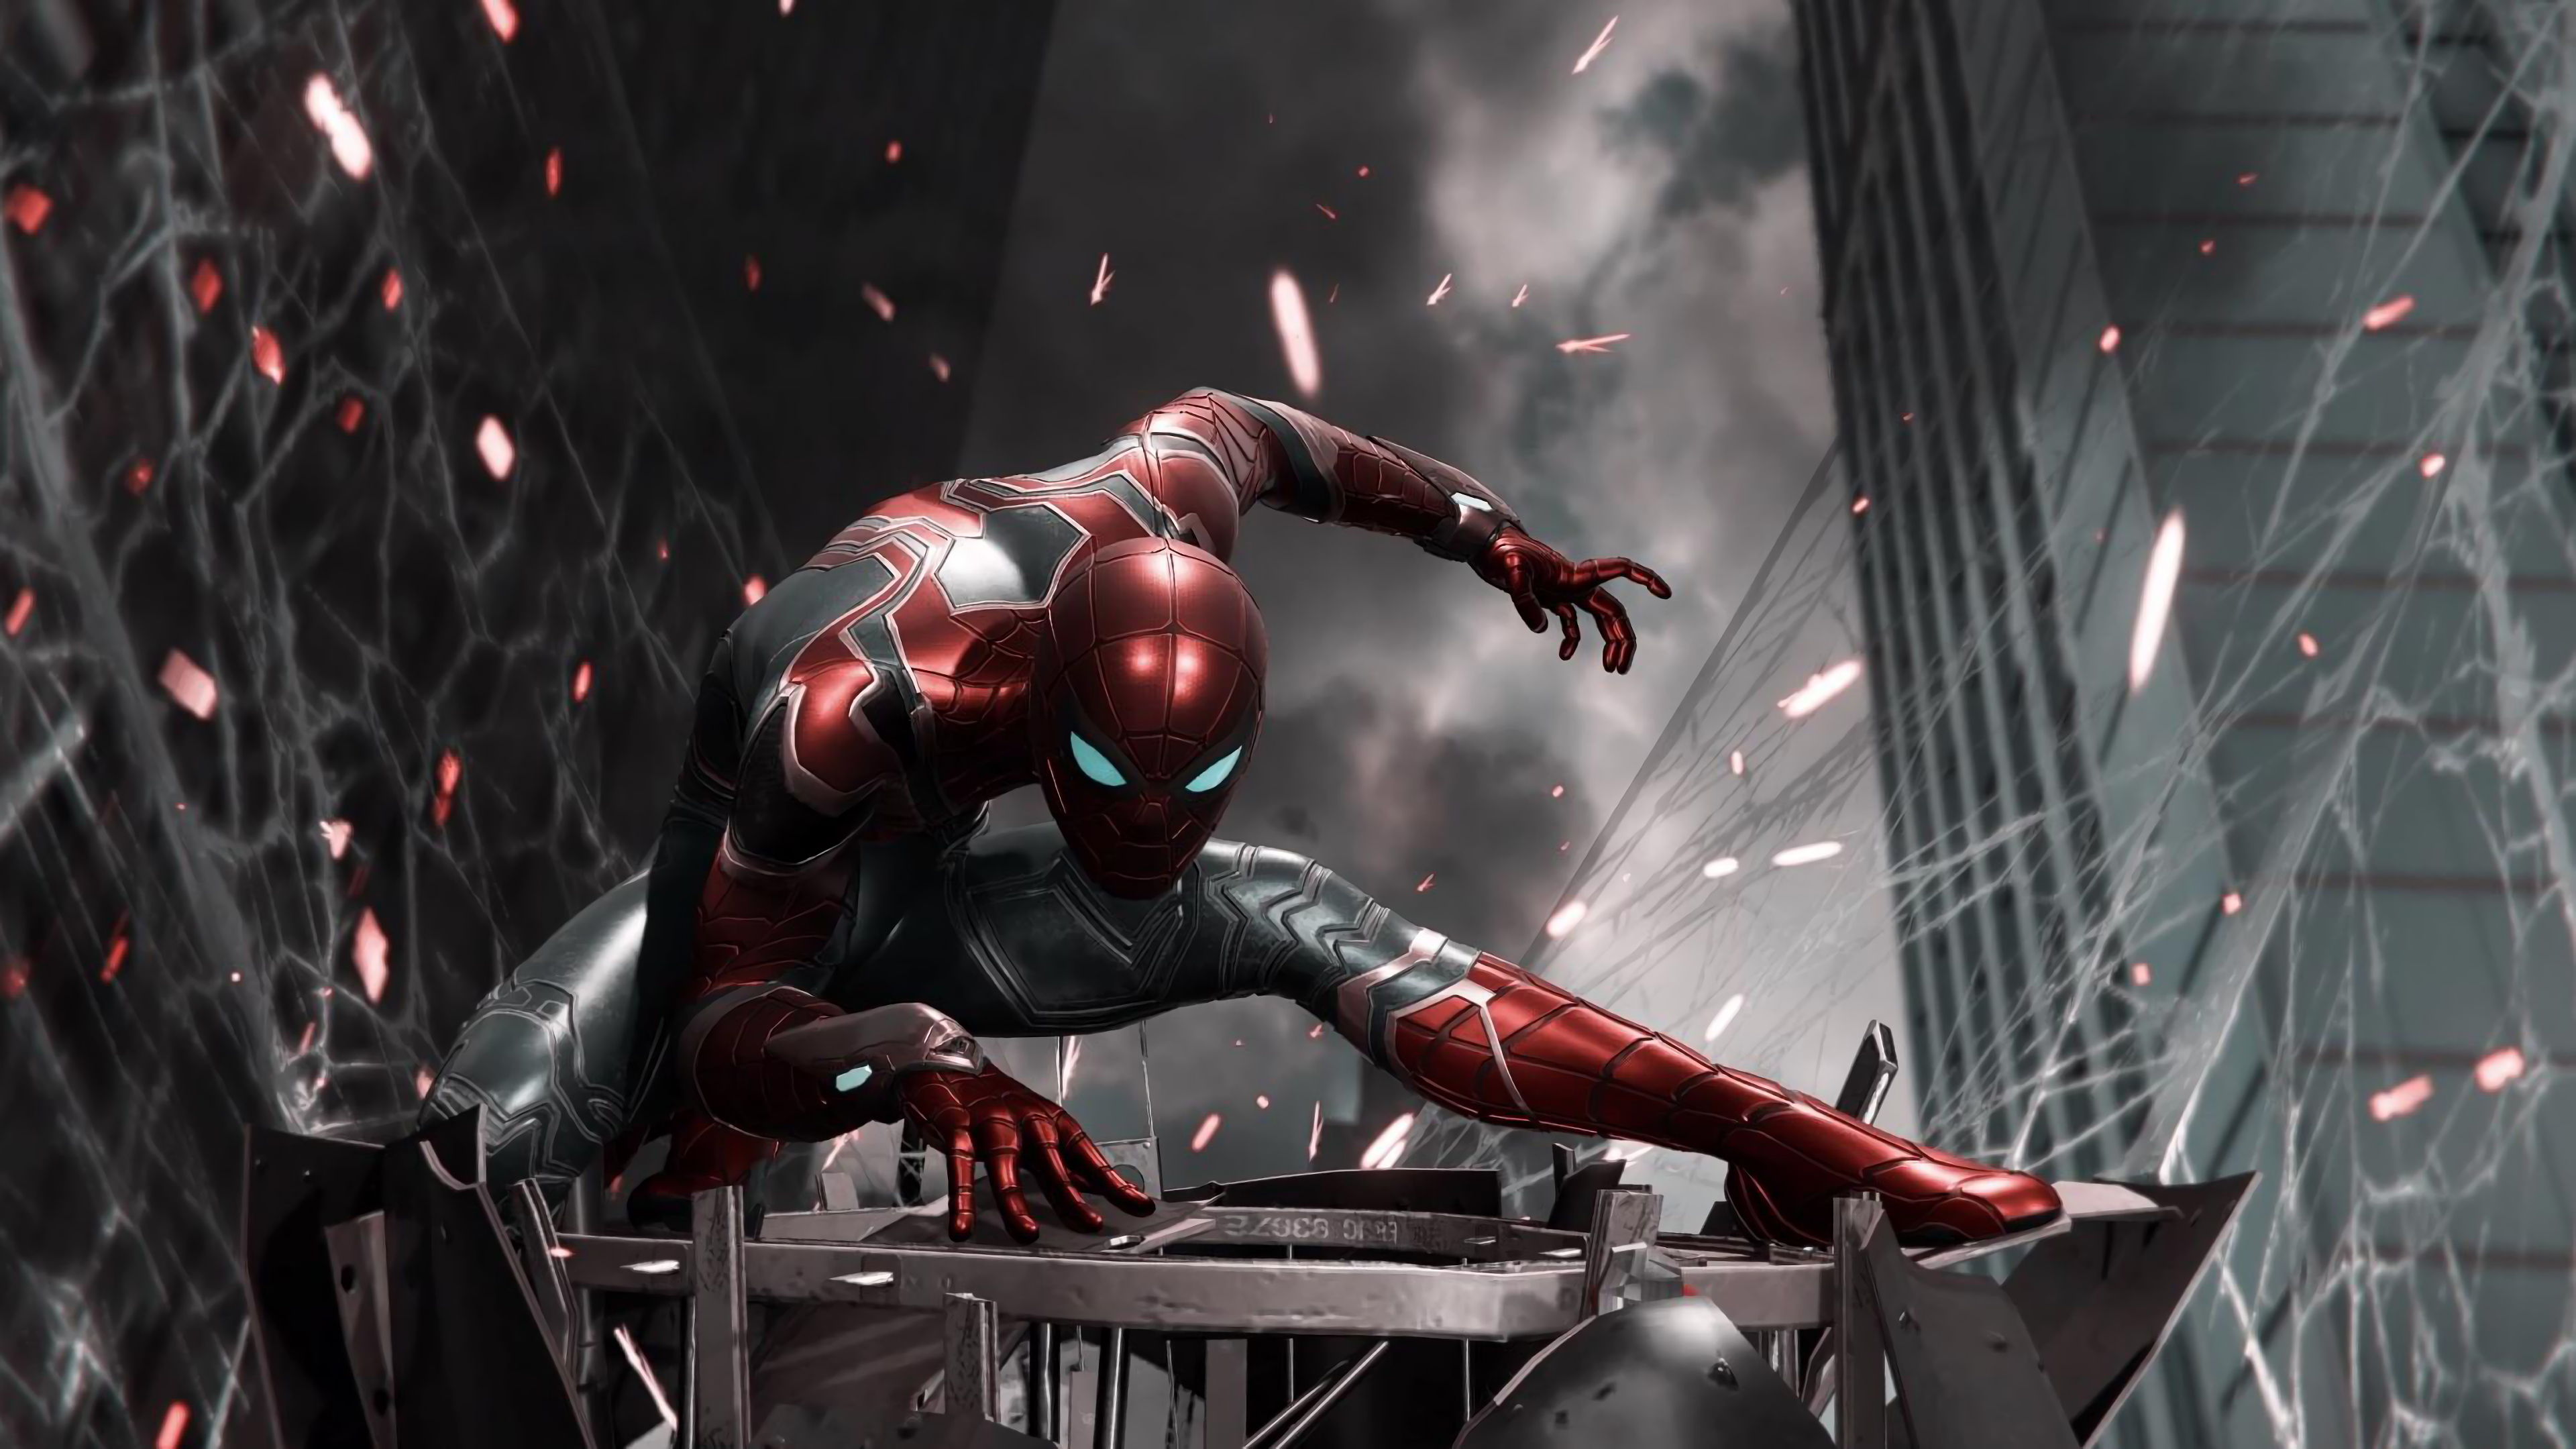  Spiderman  Iron  Suit Ps4 HD Games 4k  Wallpapers  Images 